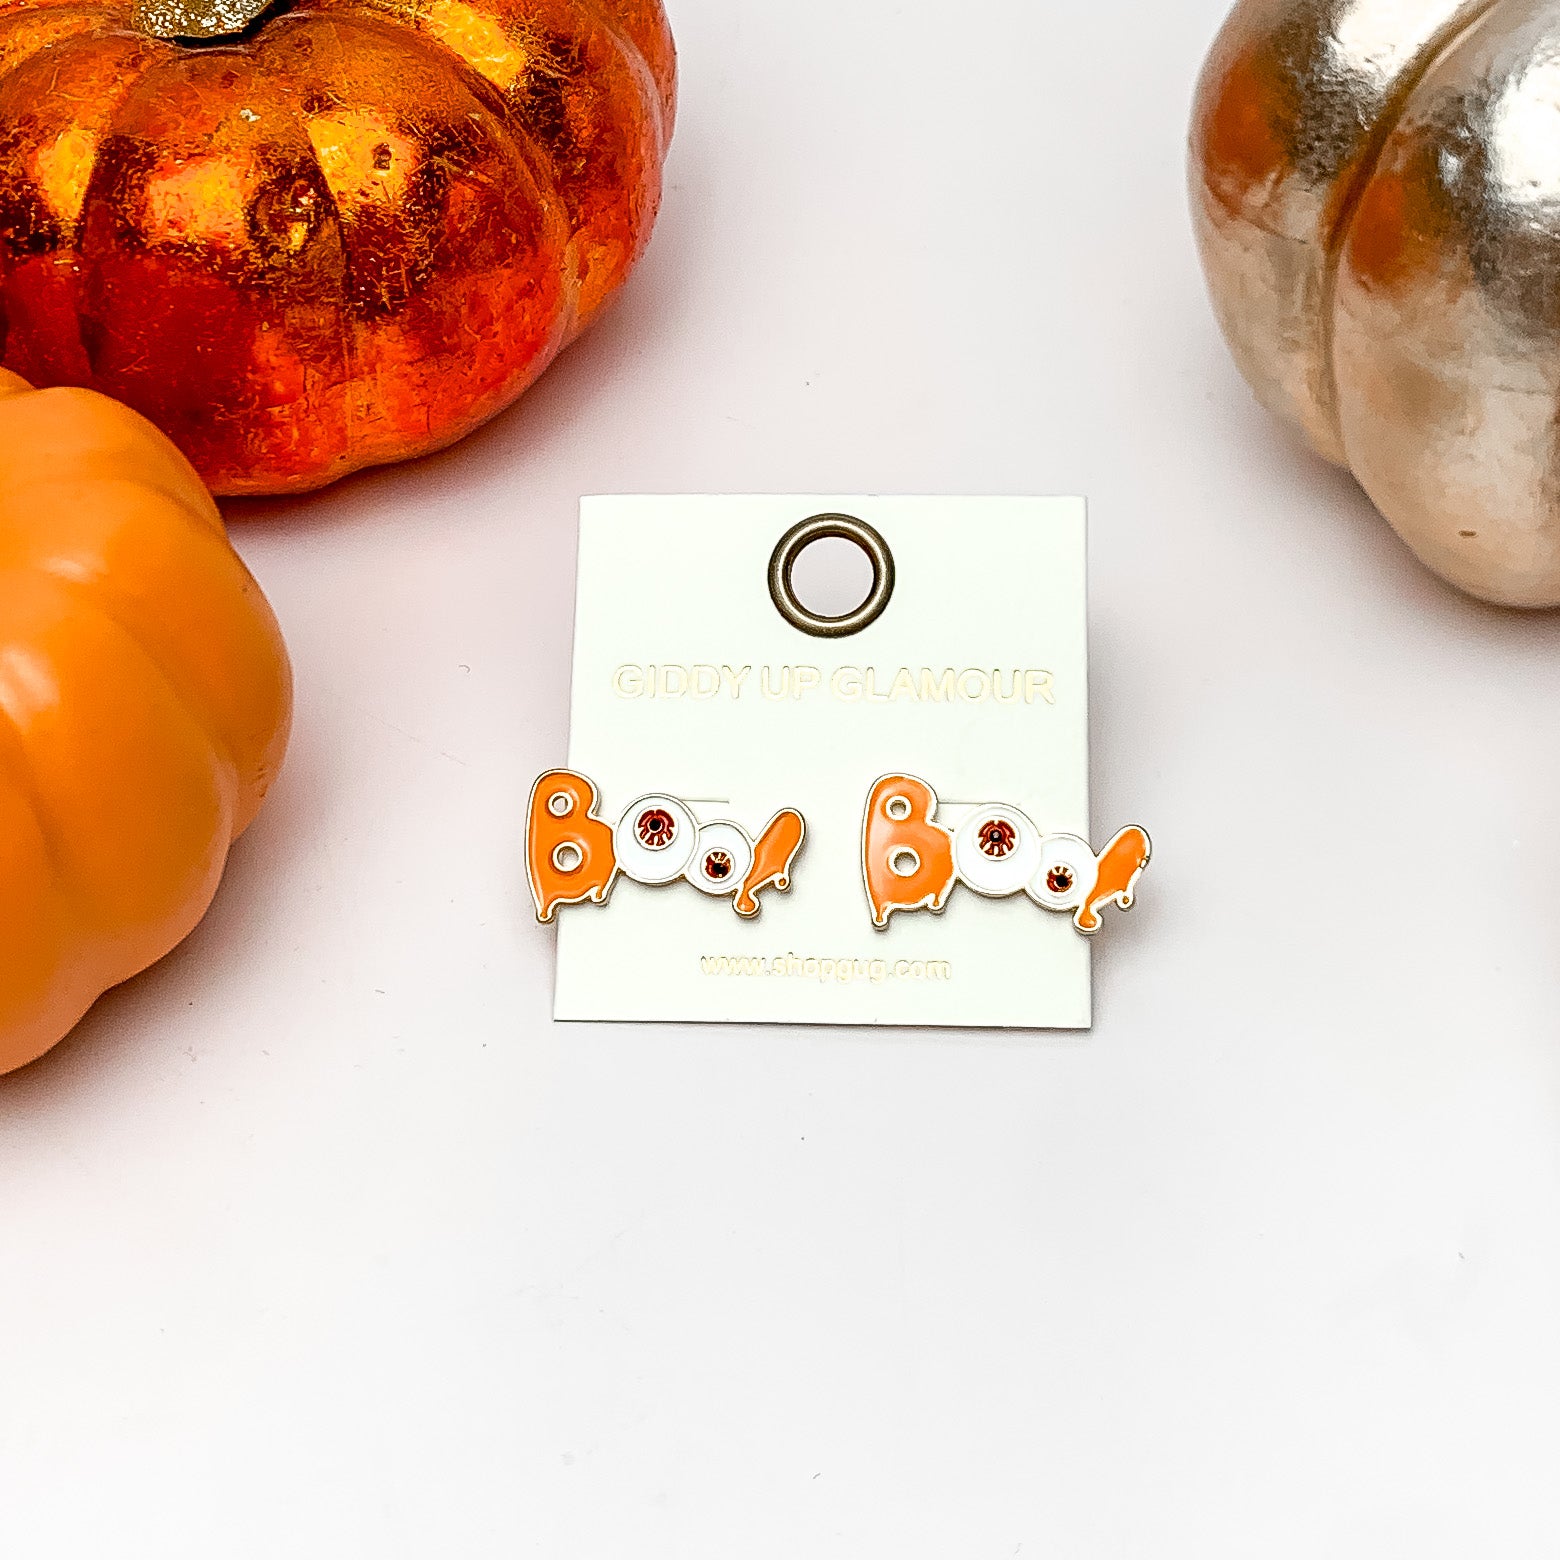 Boo Stud Earrings with Red Eyeballs in Orange. These earrings are on a white background with orange and silver pumpkins around them.